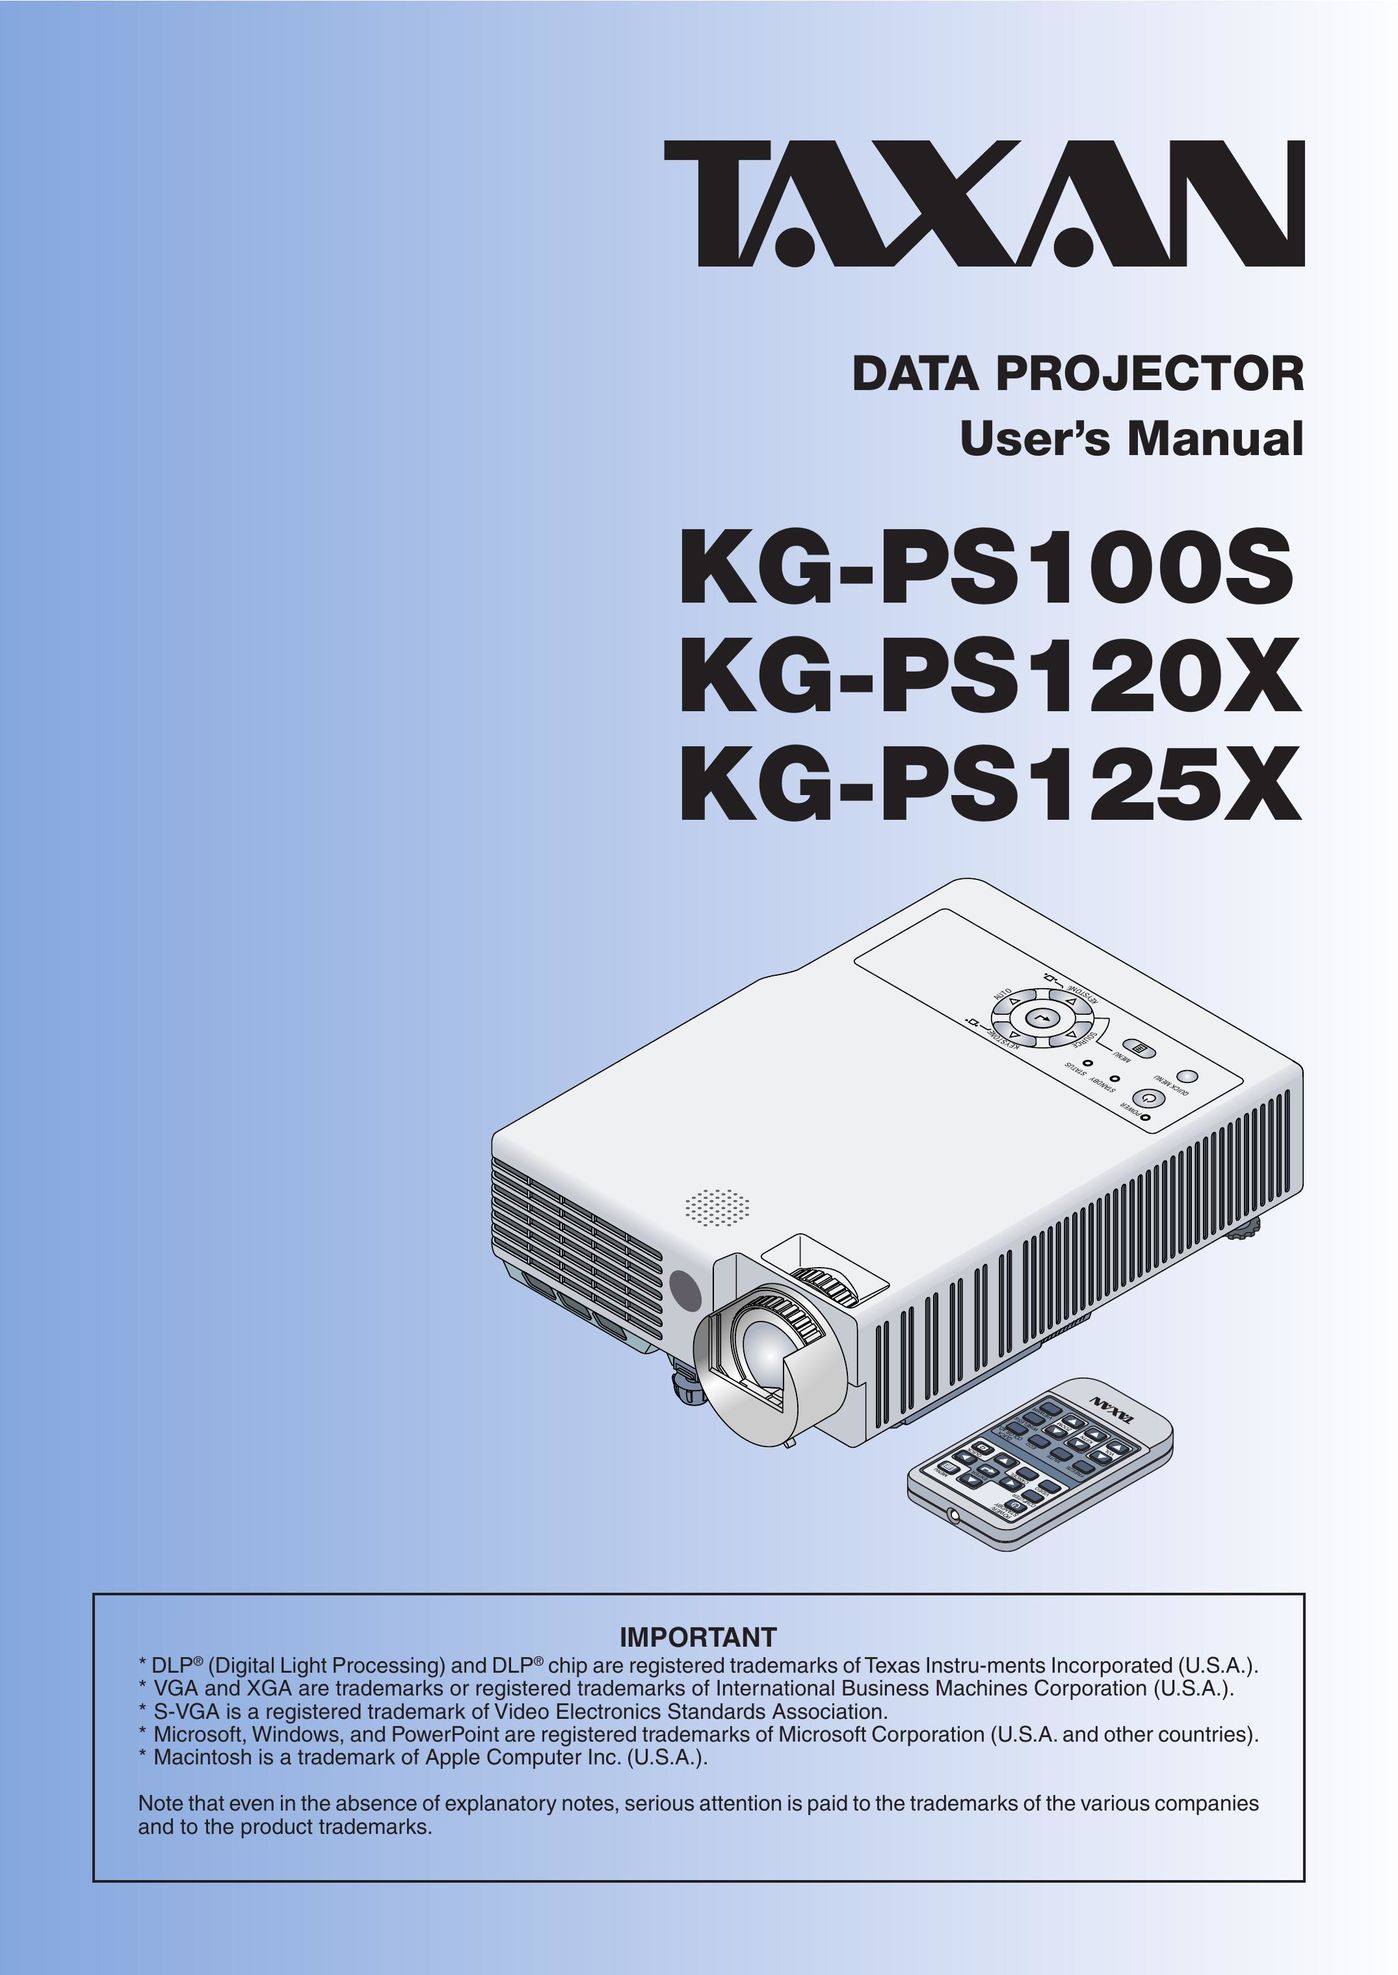 PLUS Vision KG-PS120X Projector User Manual